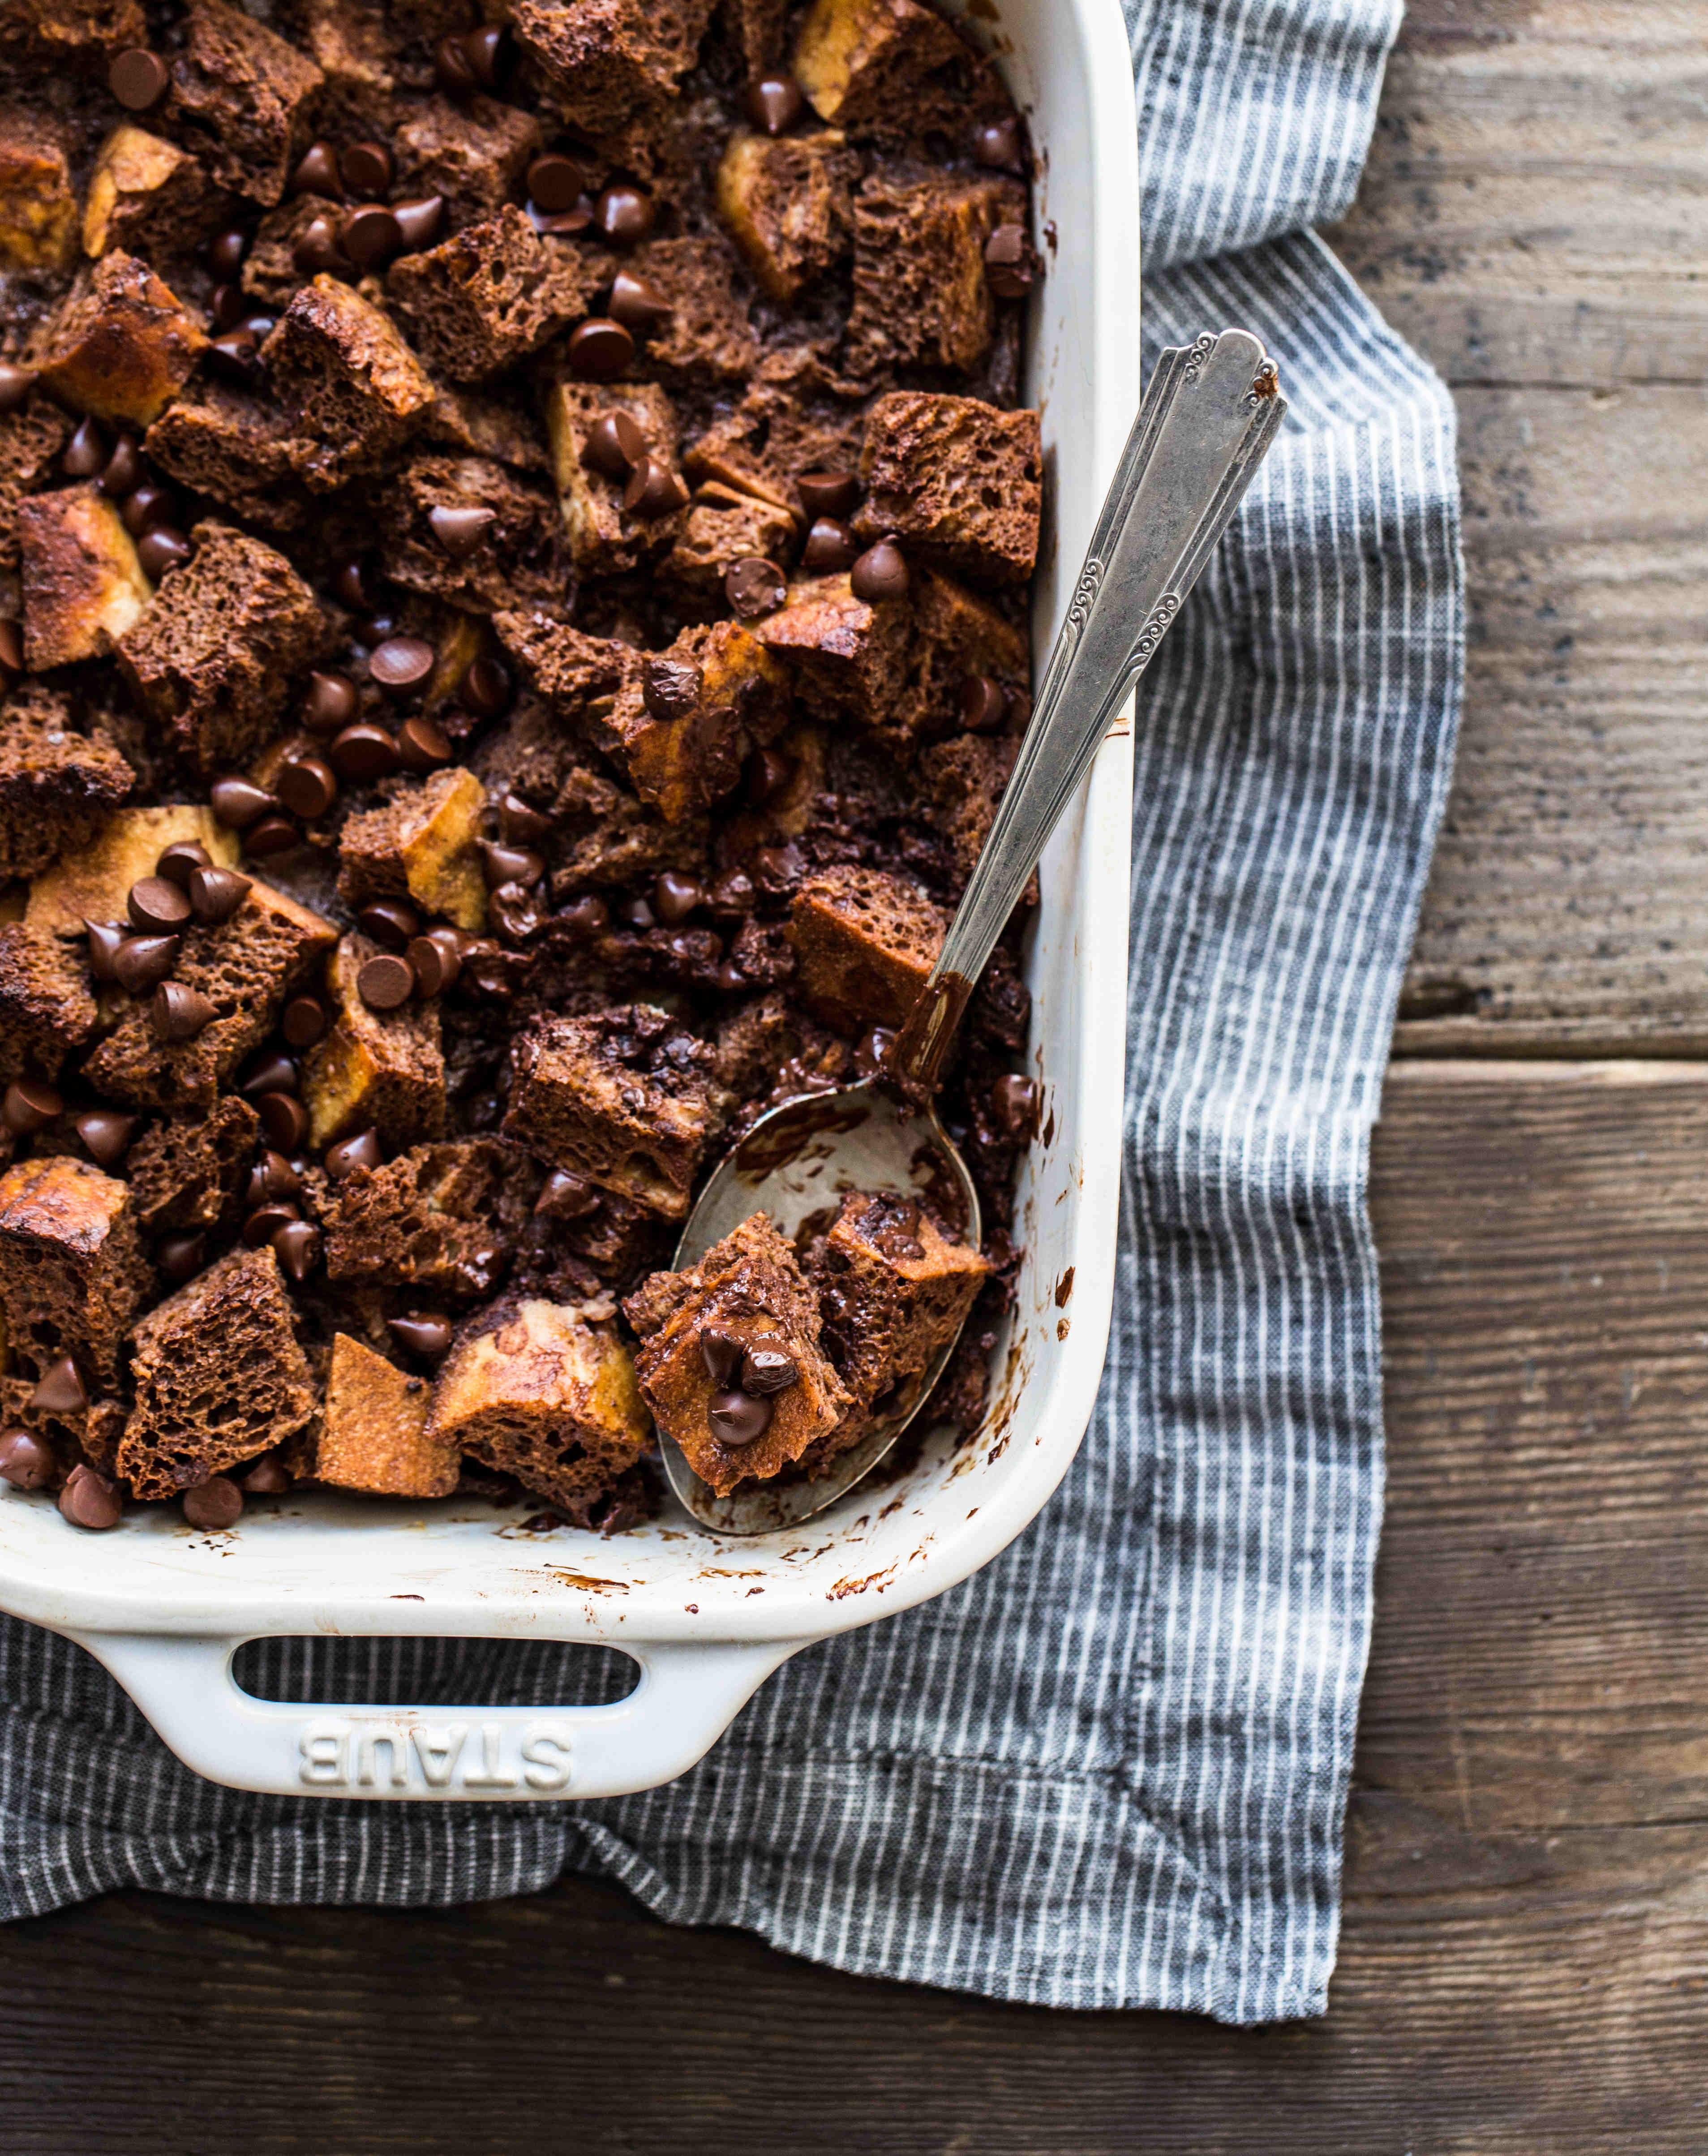 A rectangular white baking dish containing chocolate bread pudding to reduce wasted food